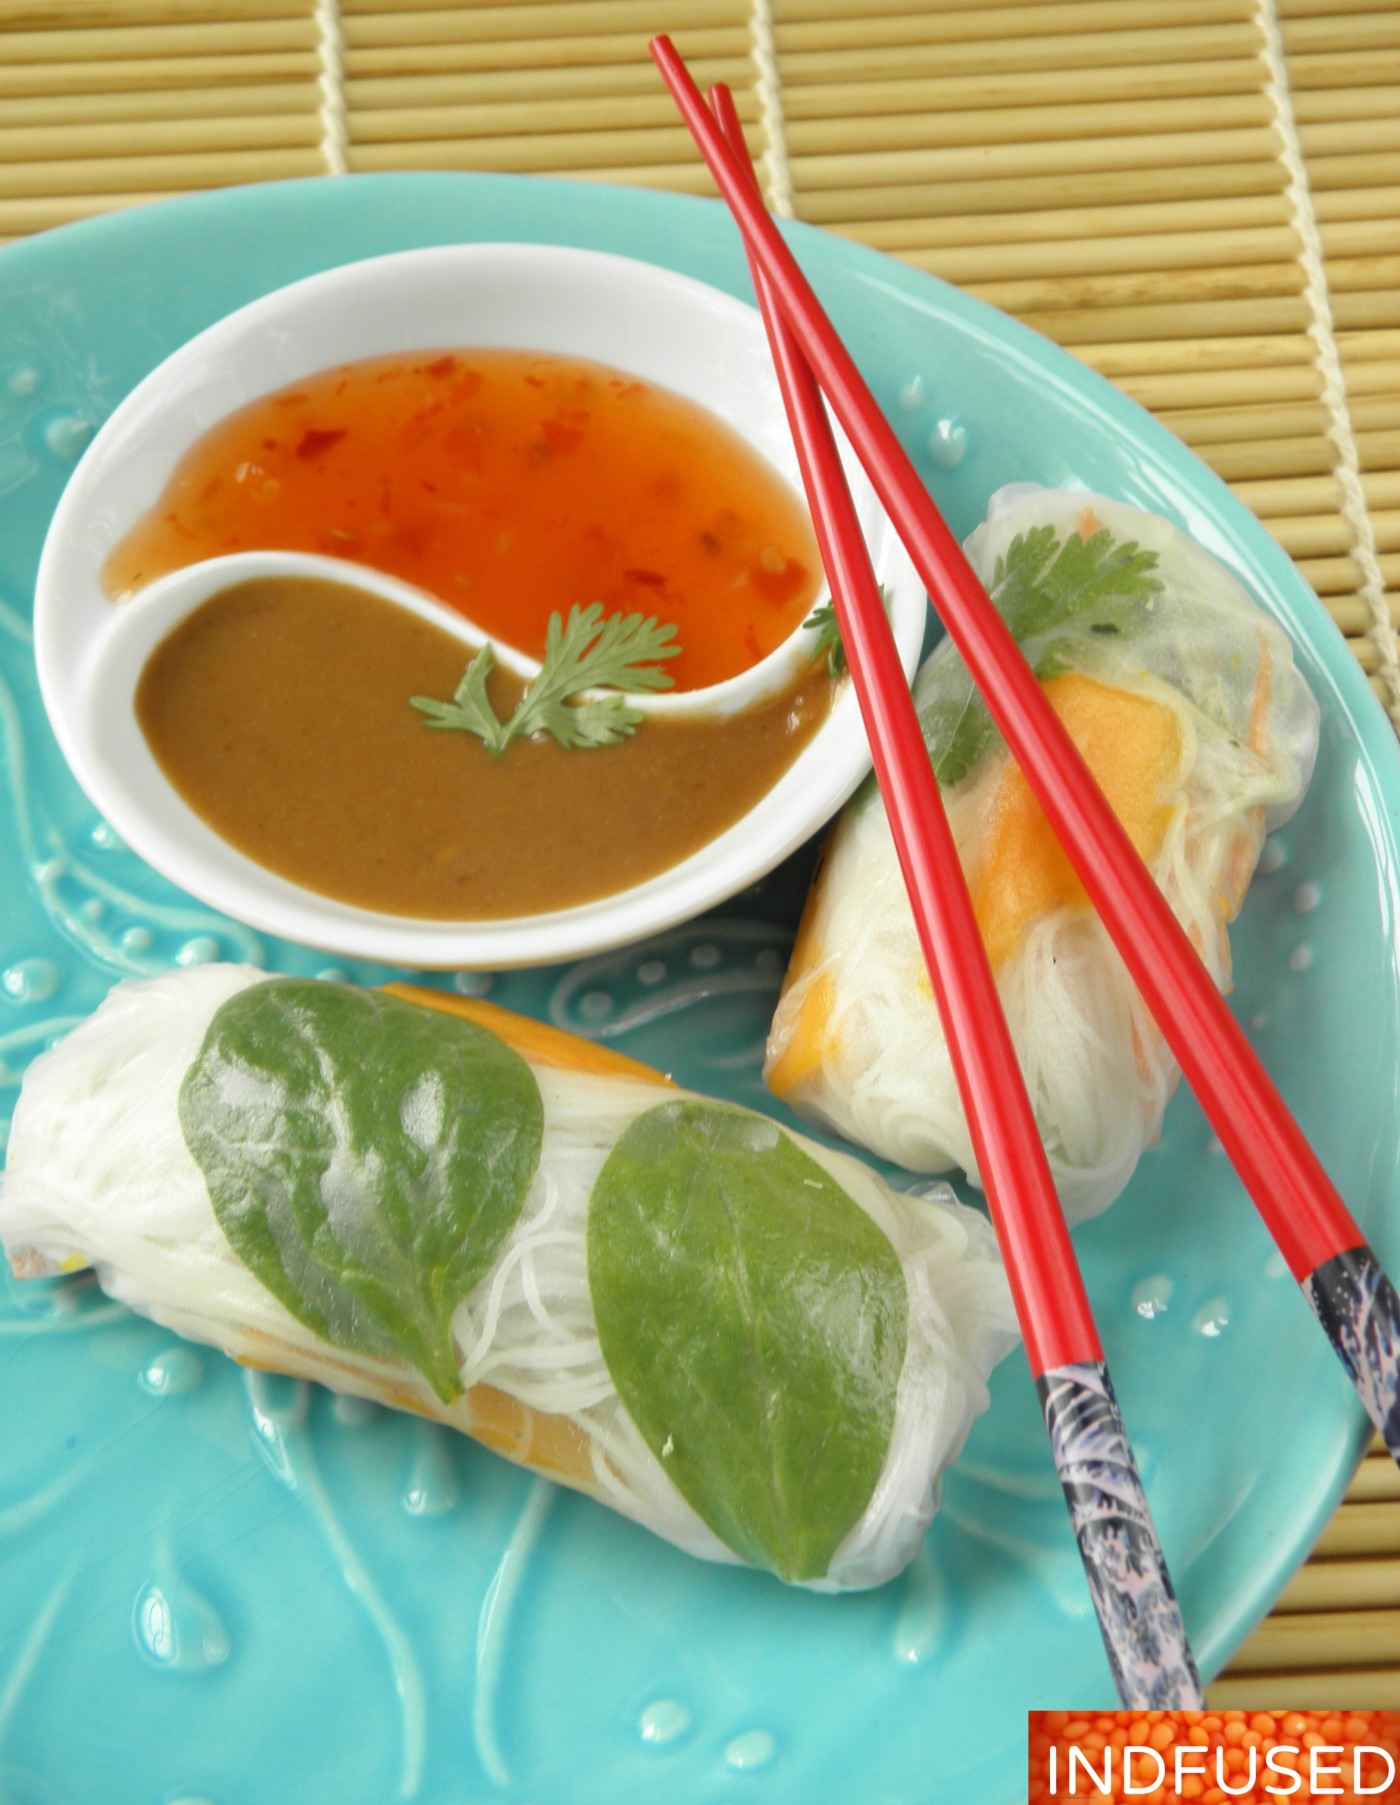 Healthy, gluten free, cool, summer rolls perfect for summer parties. These rolls and the delectable peanutty dipping sauce are packed with fusion flavors.